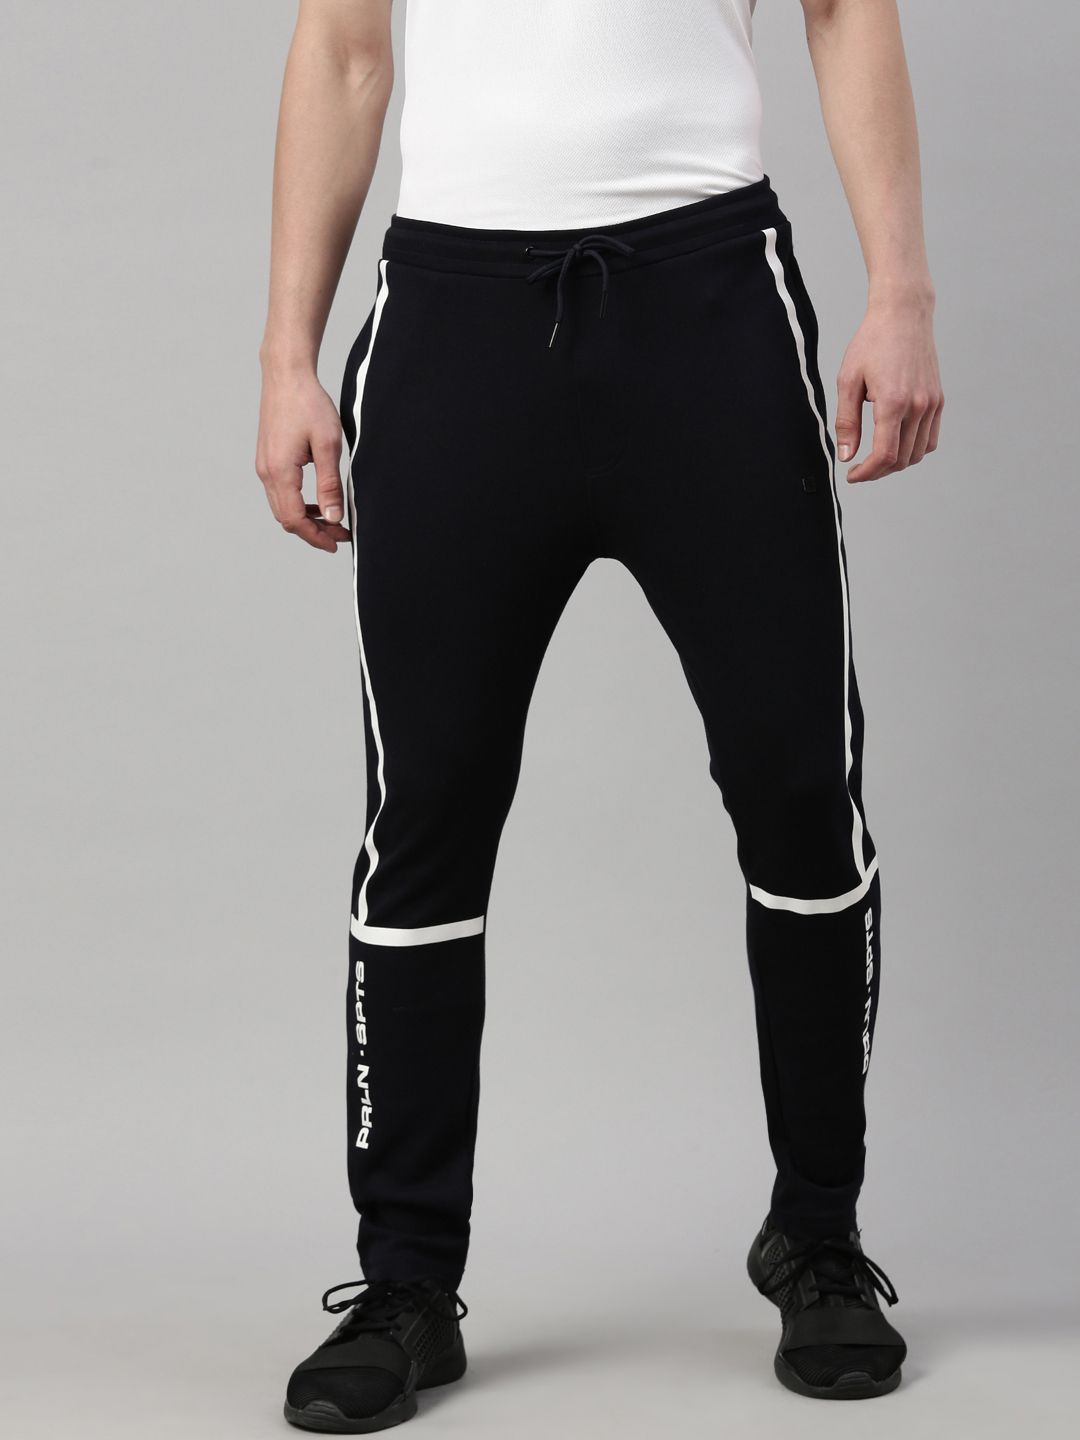 Track Pant for Men | Track Pants | Lycra Full Elastic Jogger Track Pant  (A-TP-01-04) (S, Black) : Amazon.in: Clothing & Accessories